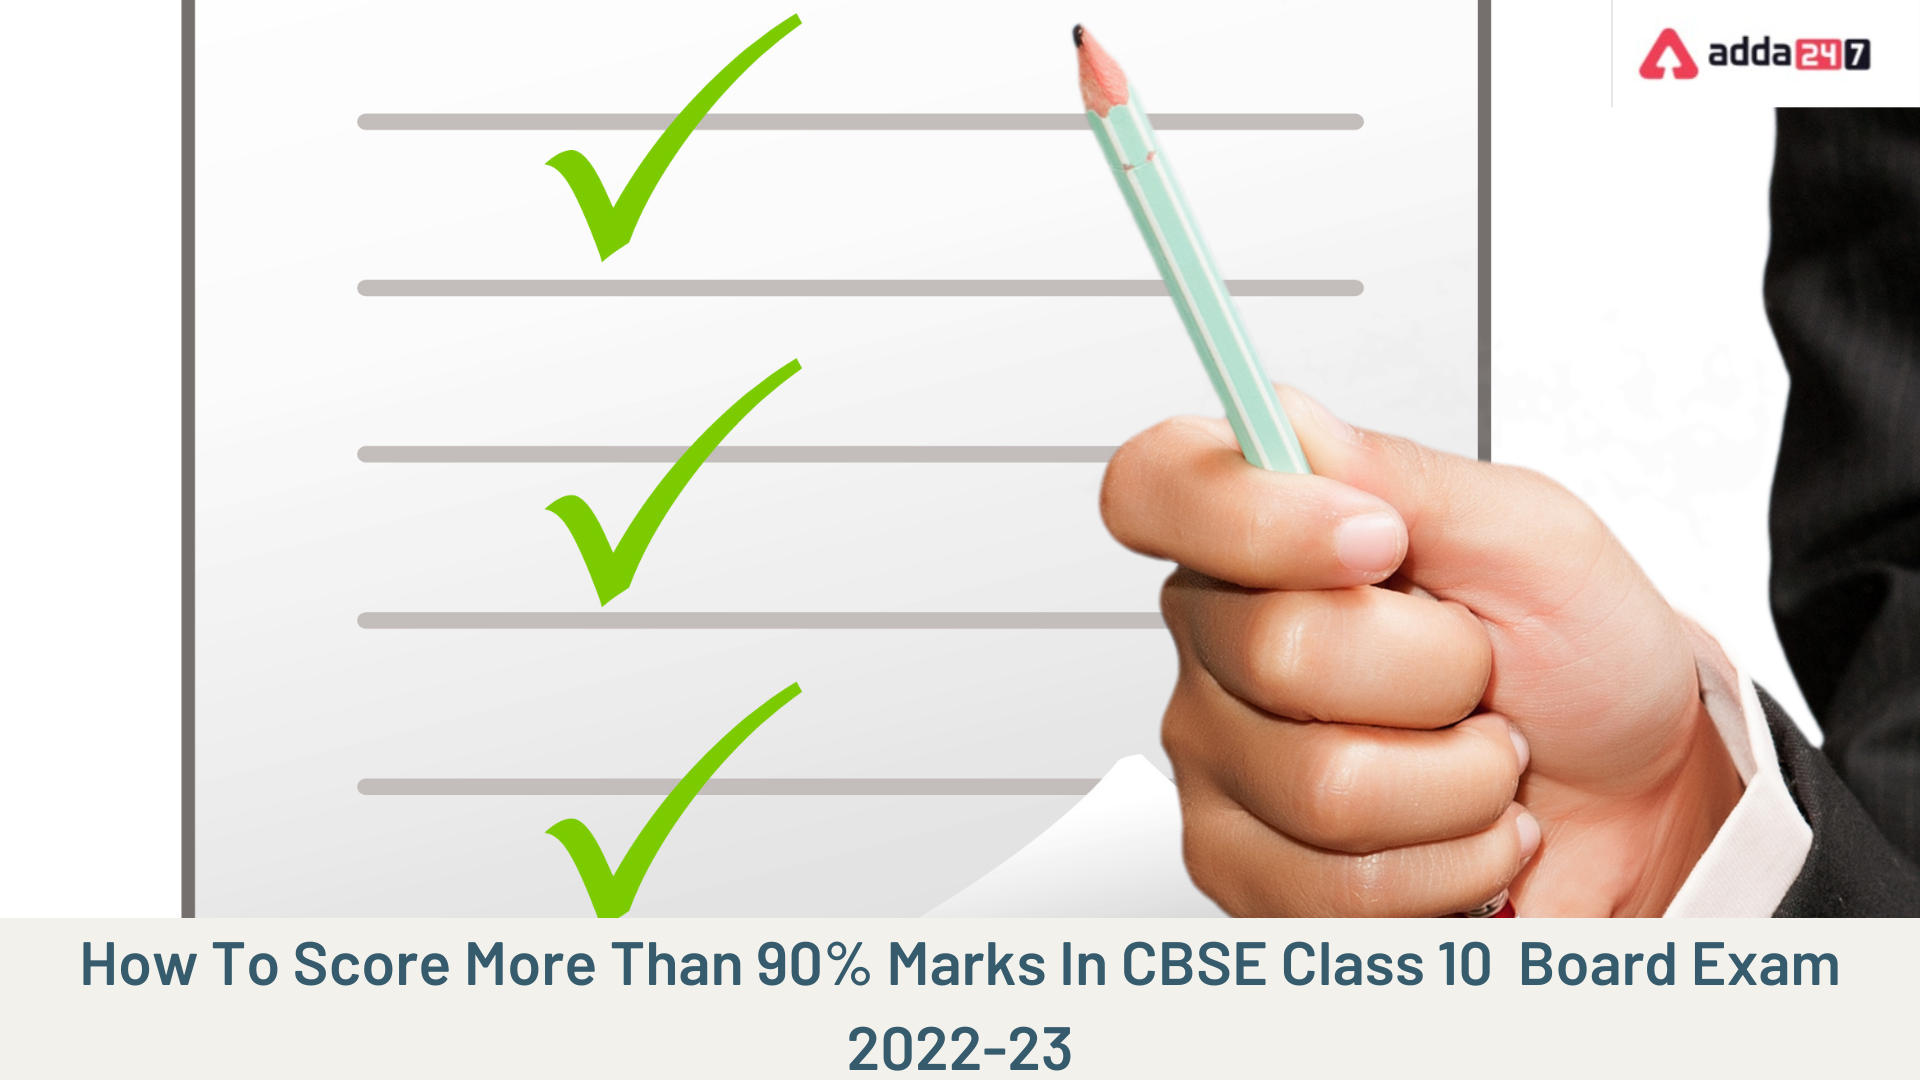 How To Score More Than 90% Marks In CBSE Class 10 Board Exam 2022-23